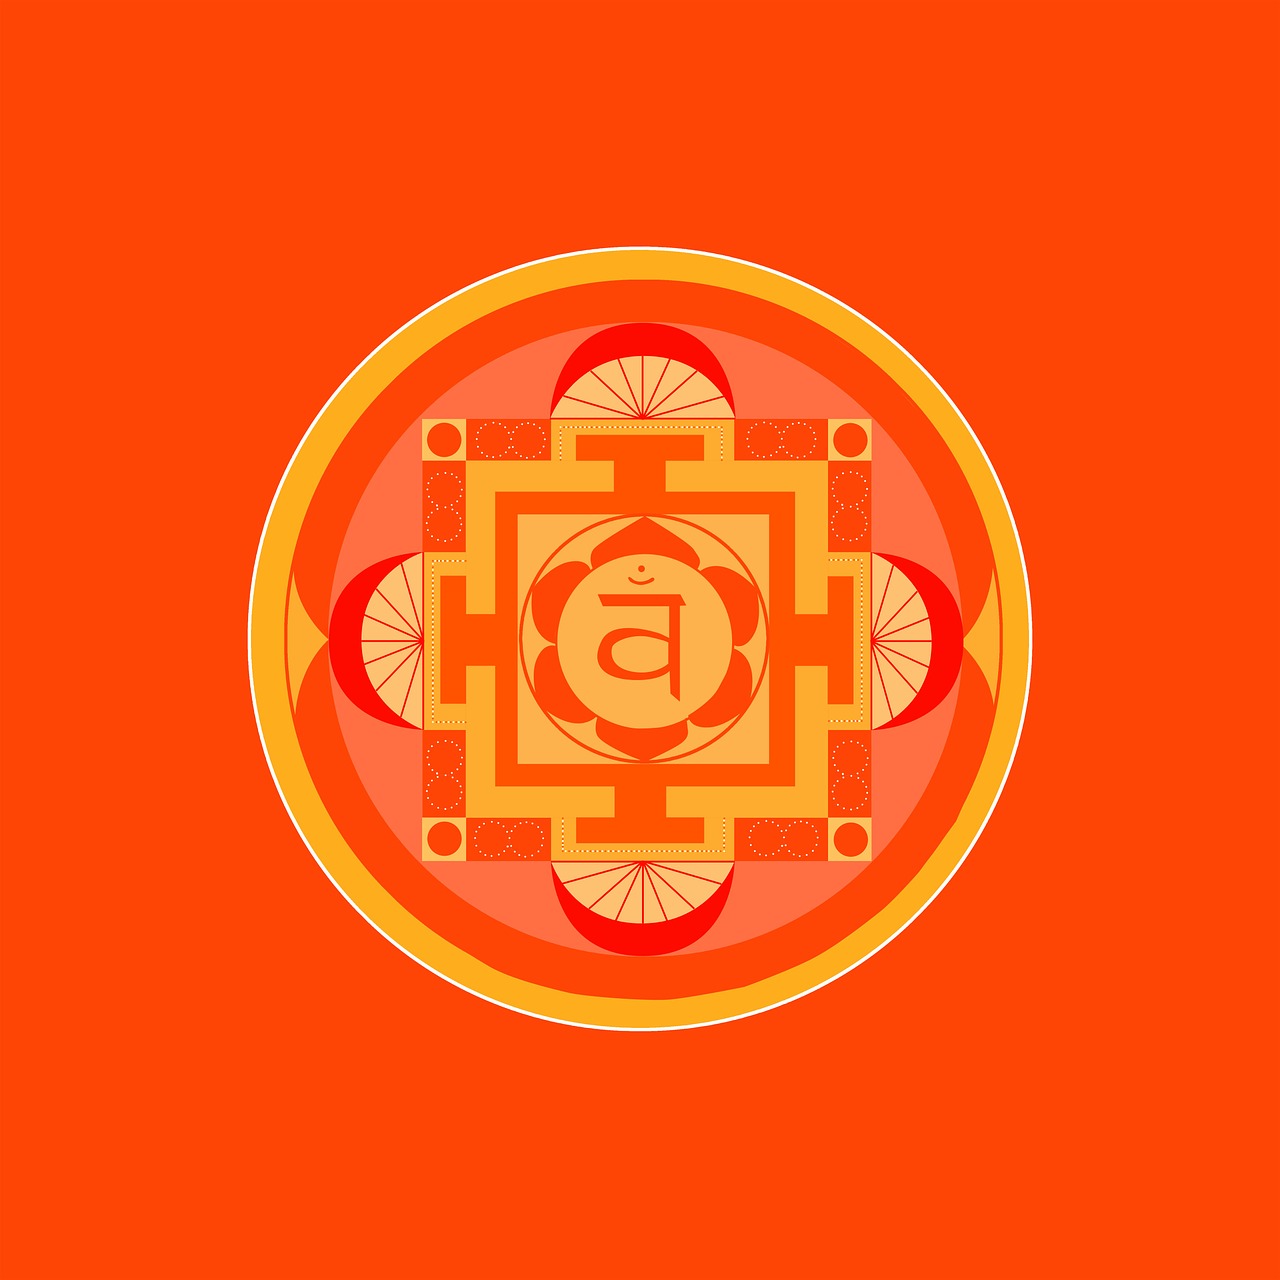 the chakrai symbol on an orange background, bright colors with red hues, perfect detail, centered in panel, carravaggion